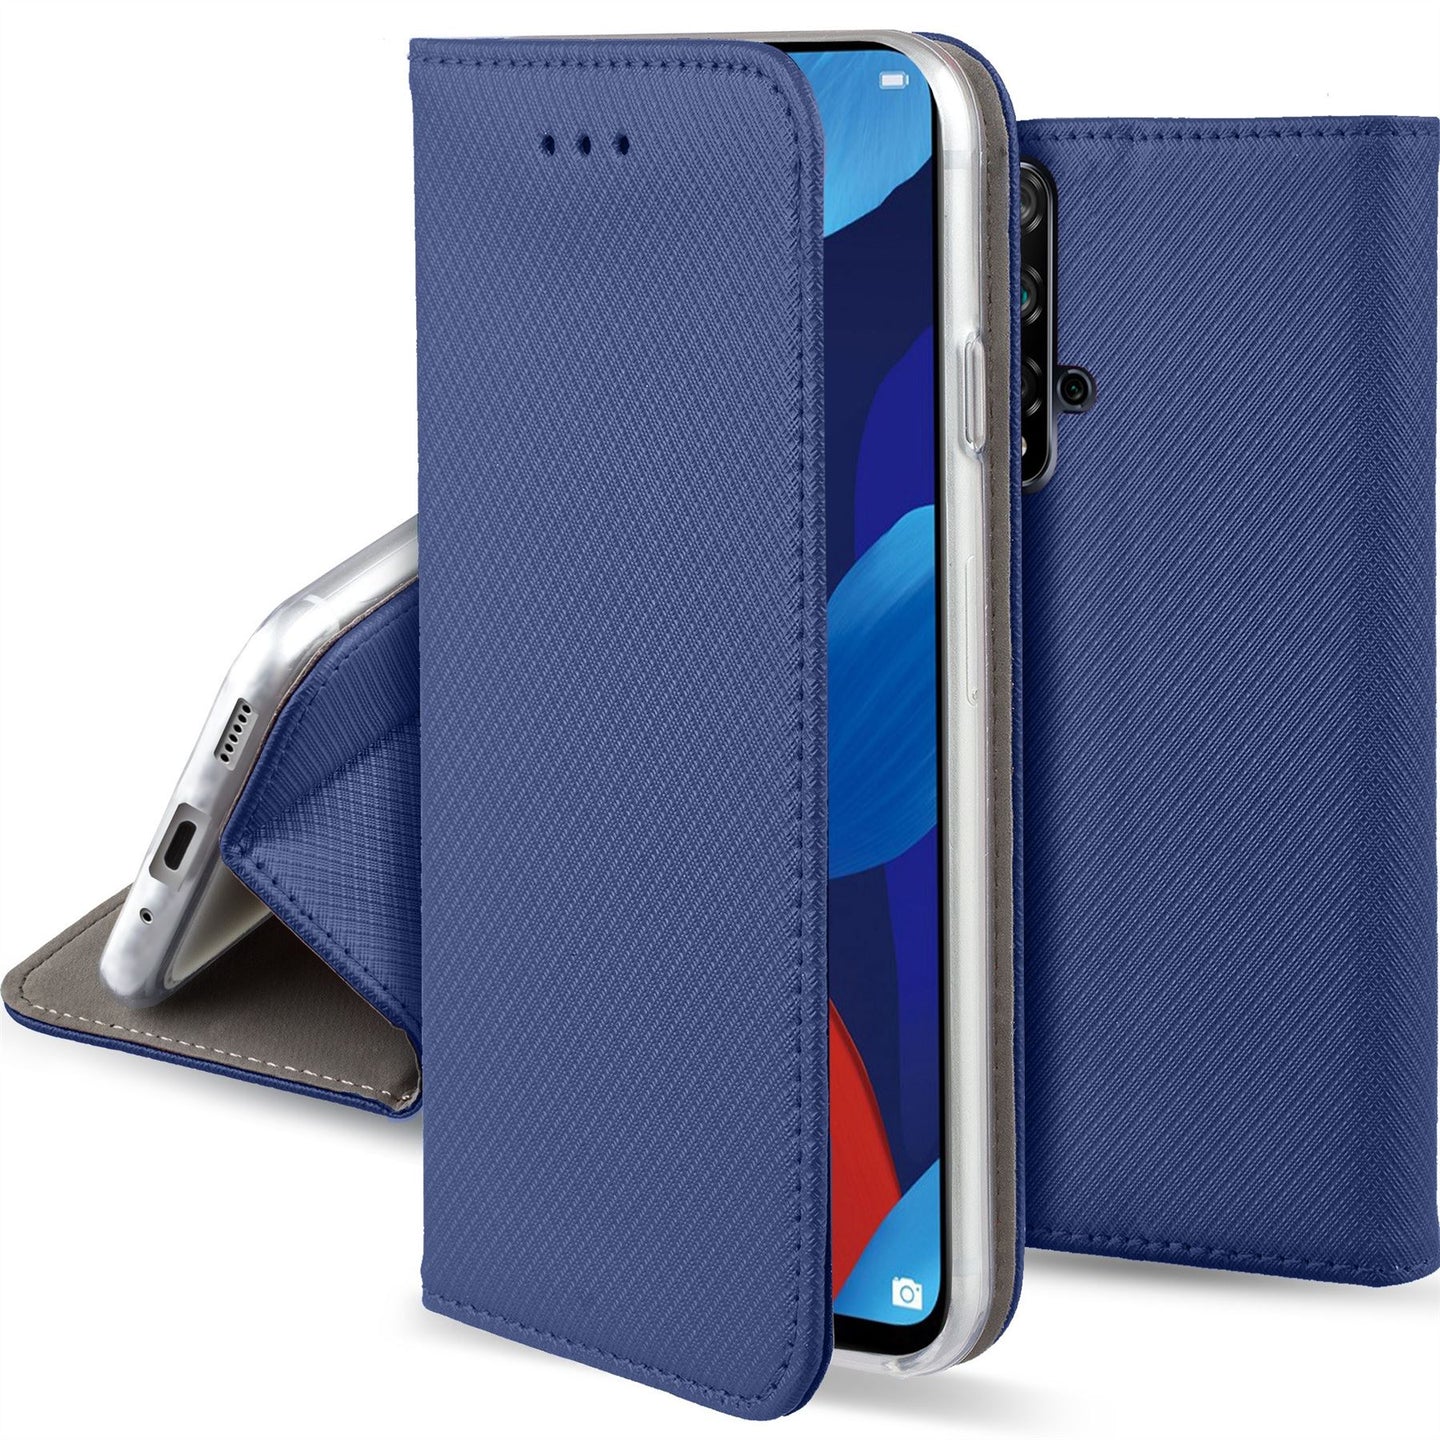 Moozy Case Flip Cover for Huawei Nova 5T and Honor 20, Dark Blue - Smart Magnetic Flip Case with Card Holder and Stand